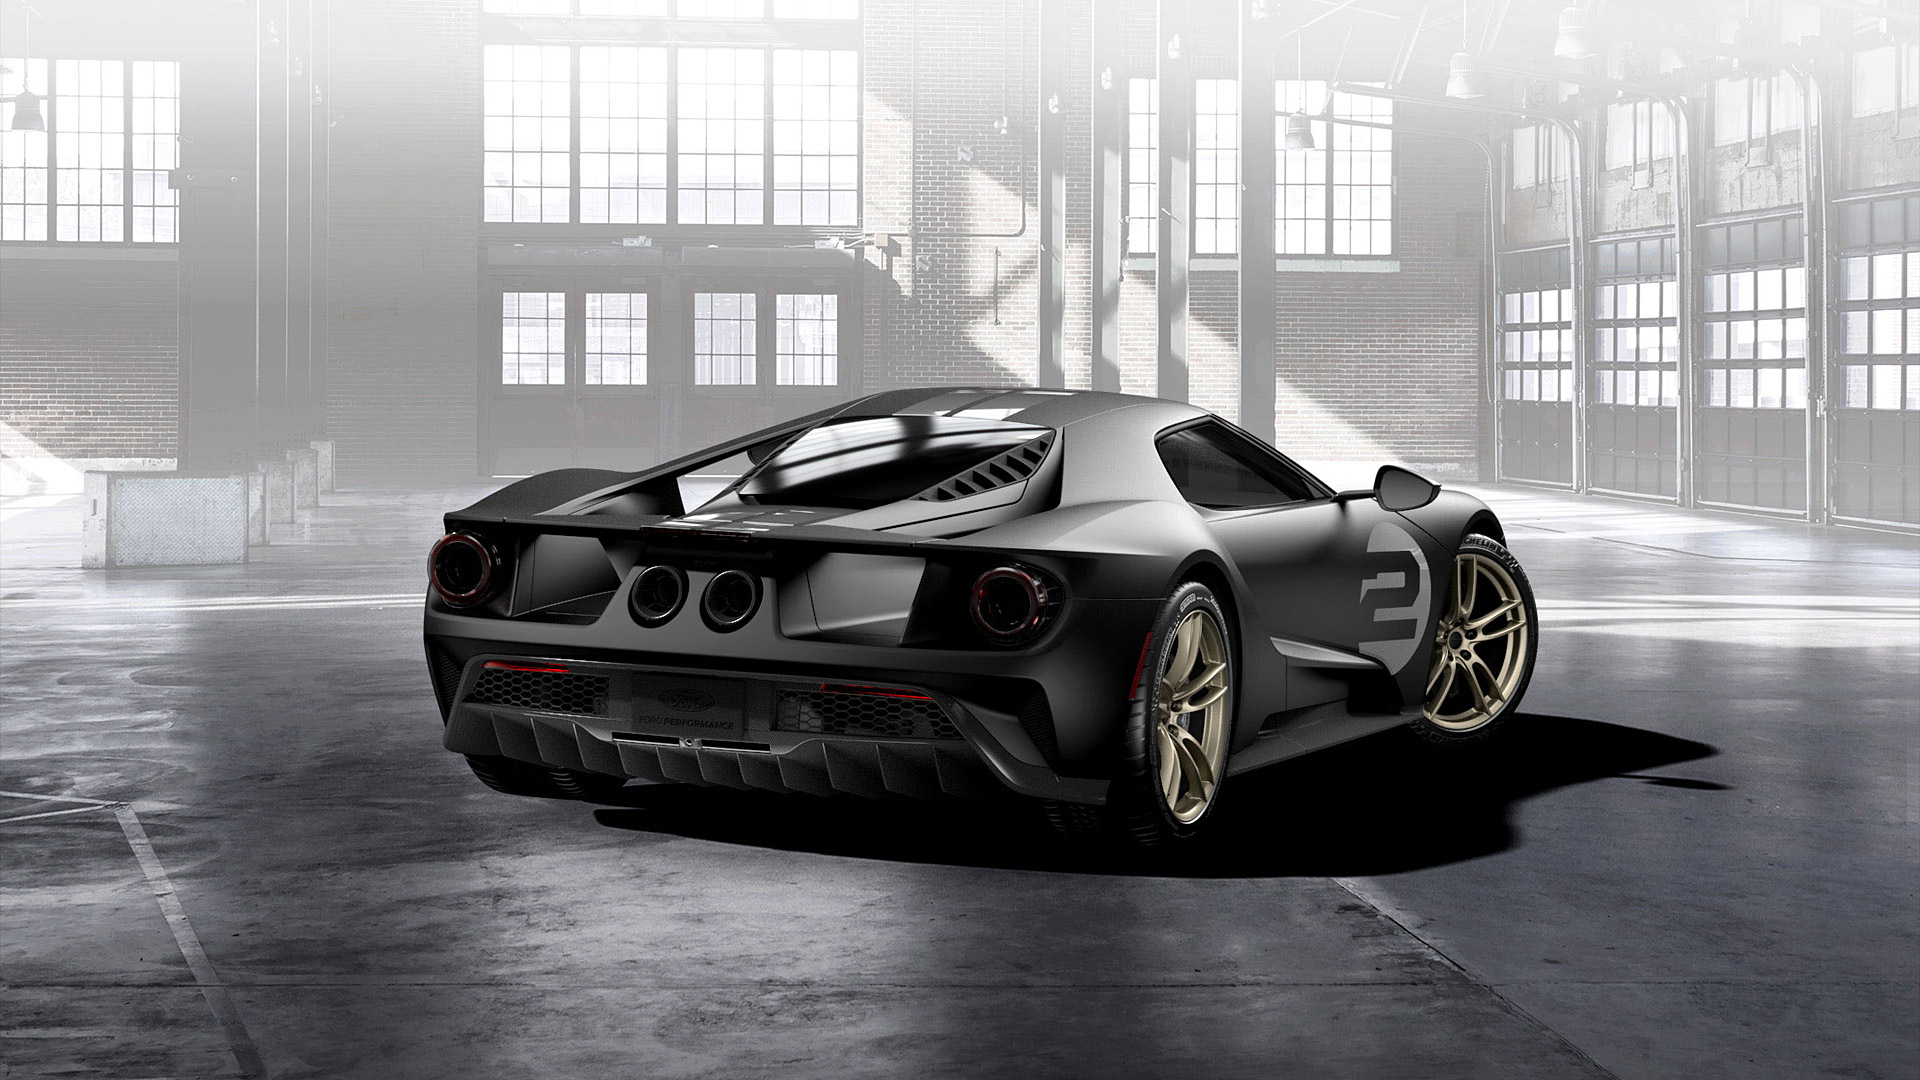  2017 Ford GT 66 Heritage Edition Wallpaper.